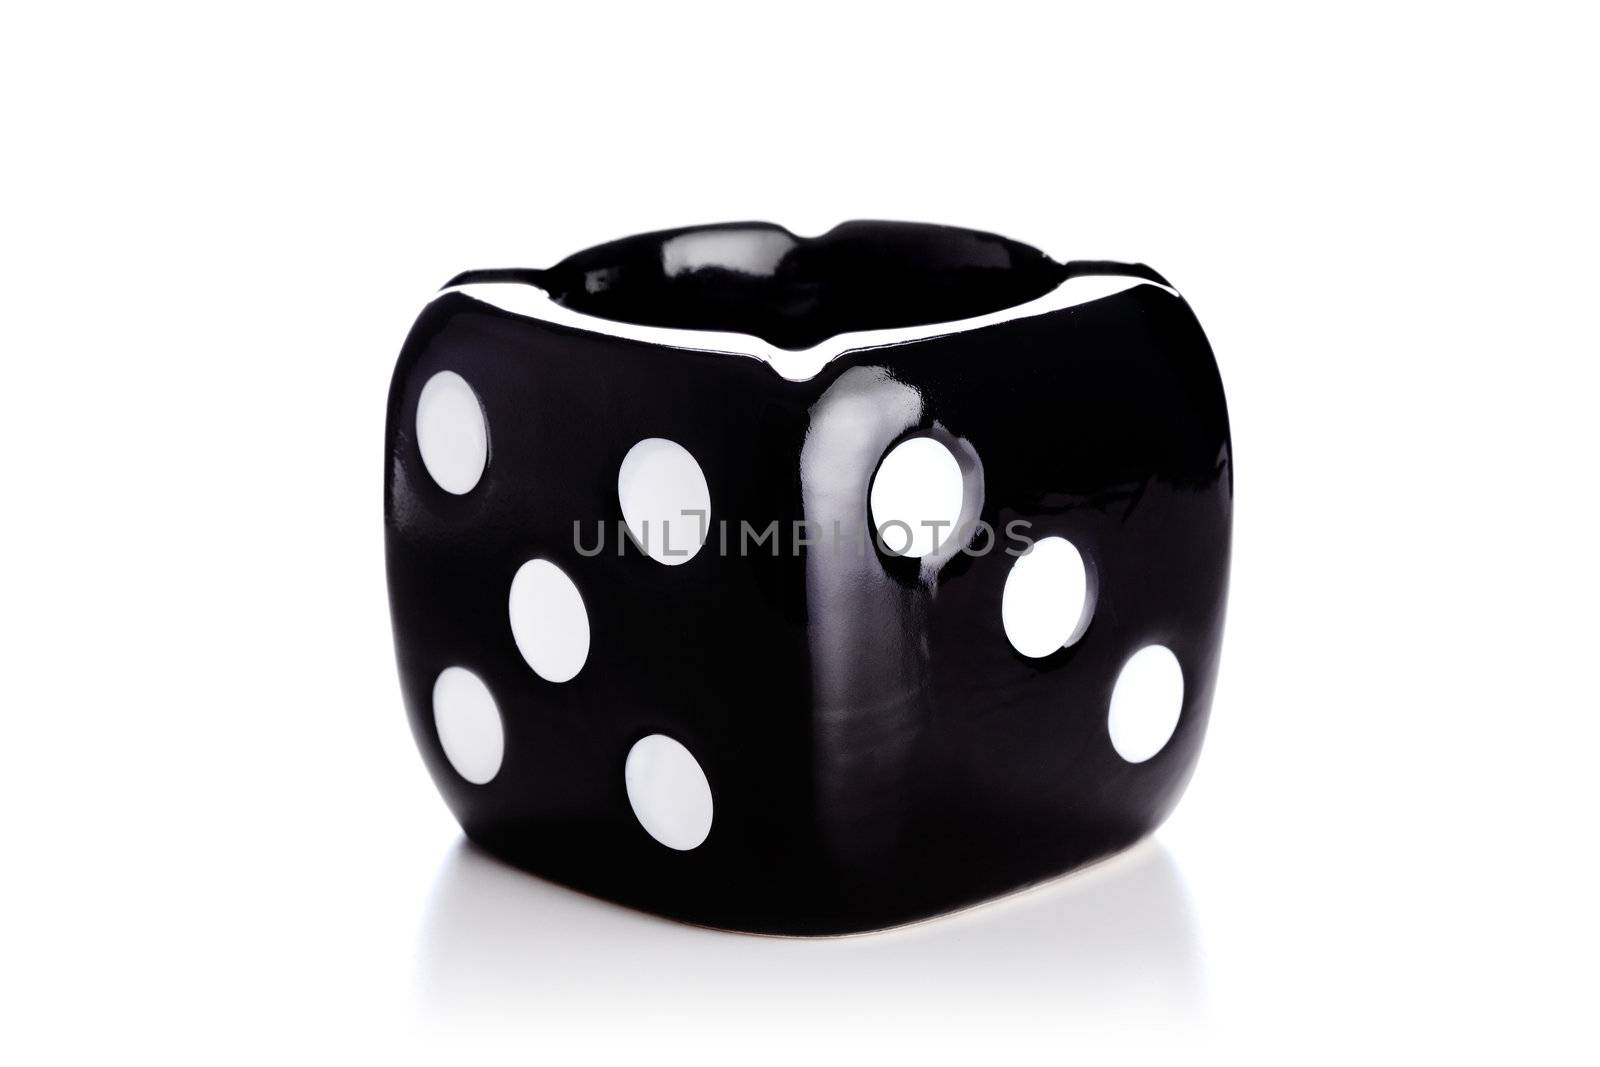 dice shaped black ash tray against white